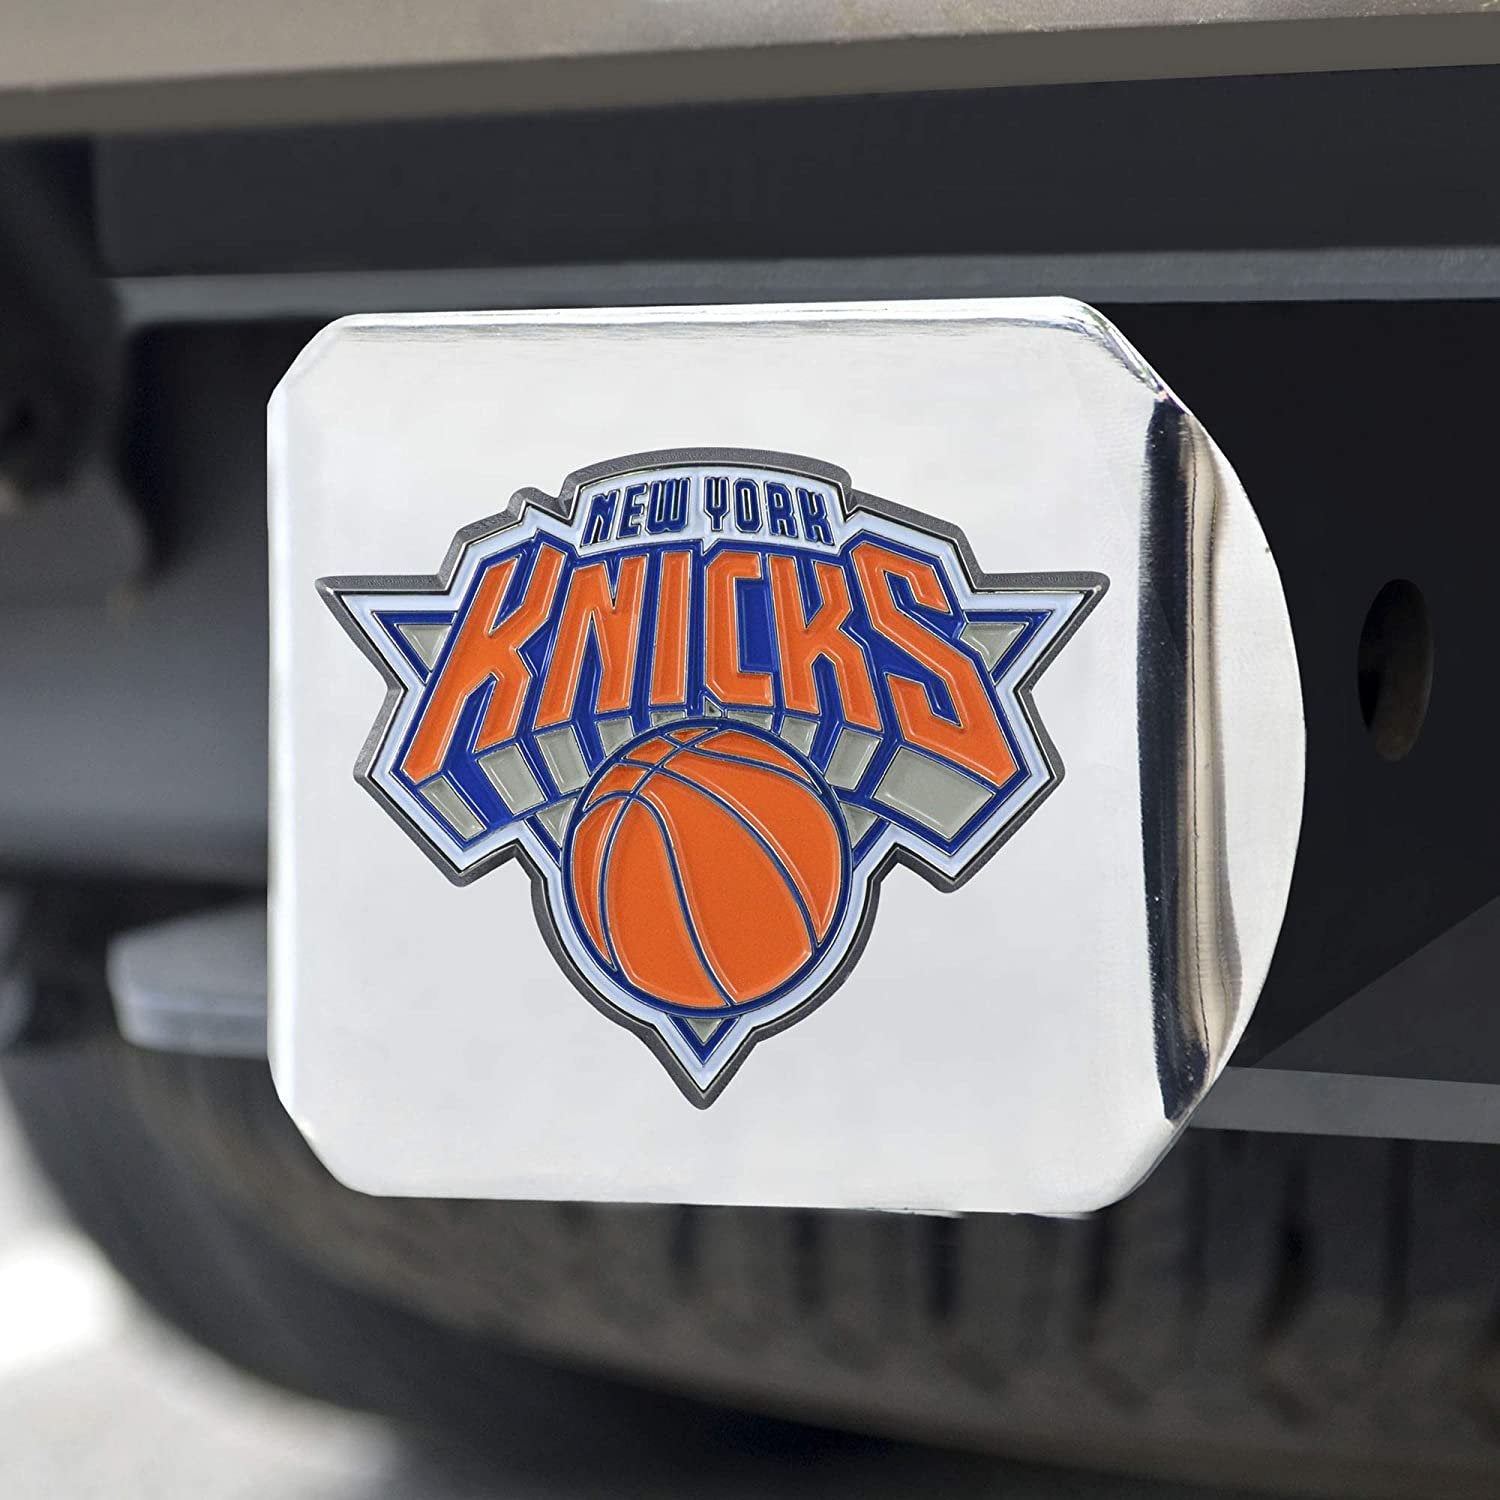 New York Knicks Hitch Cover Solid Metal with Raised Color Metal Emblem 2" Square Type III